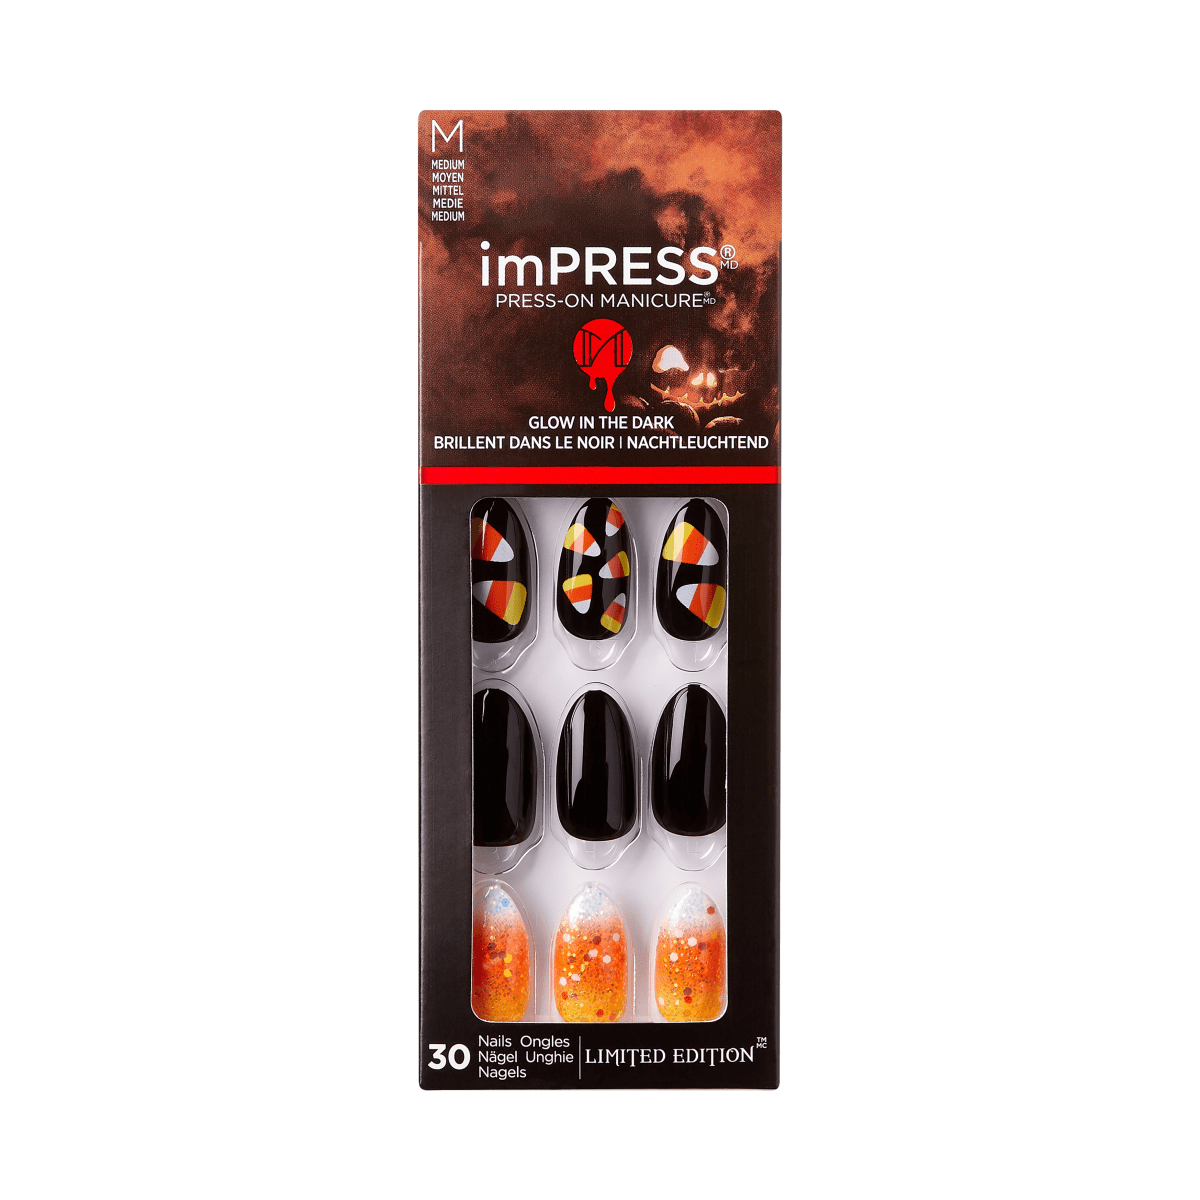 imPRESS Press-On Manicure Halloween Glow in the Dark - Howl you doing